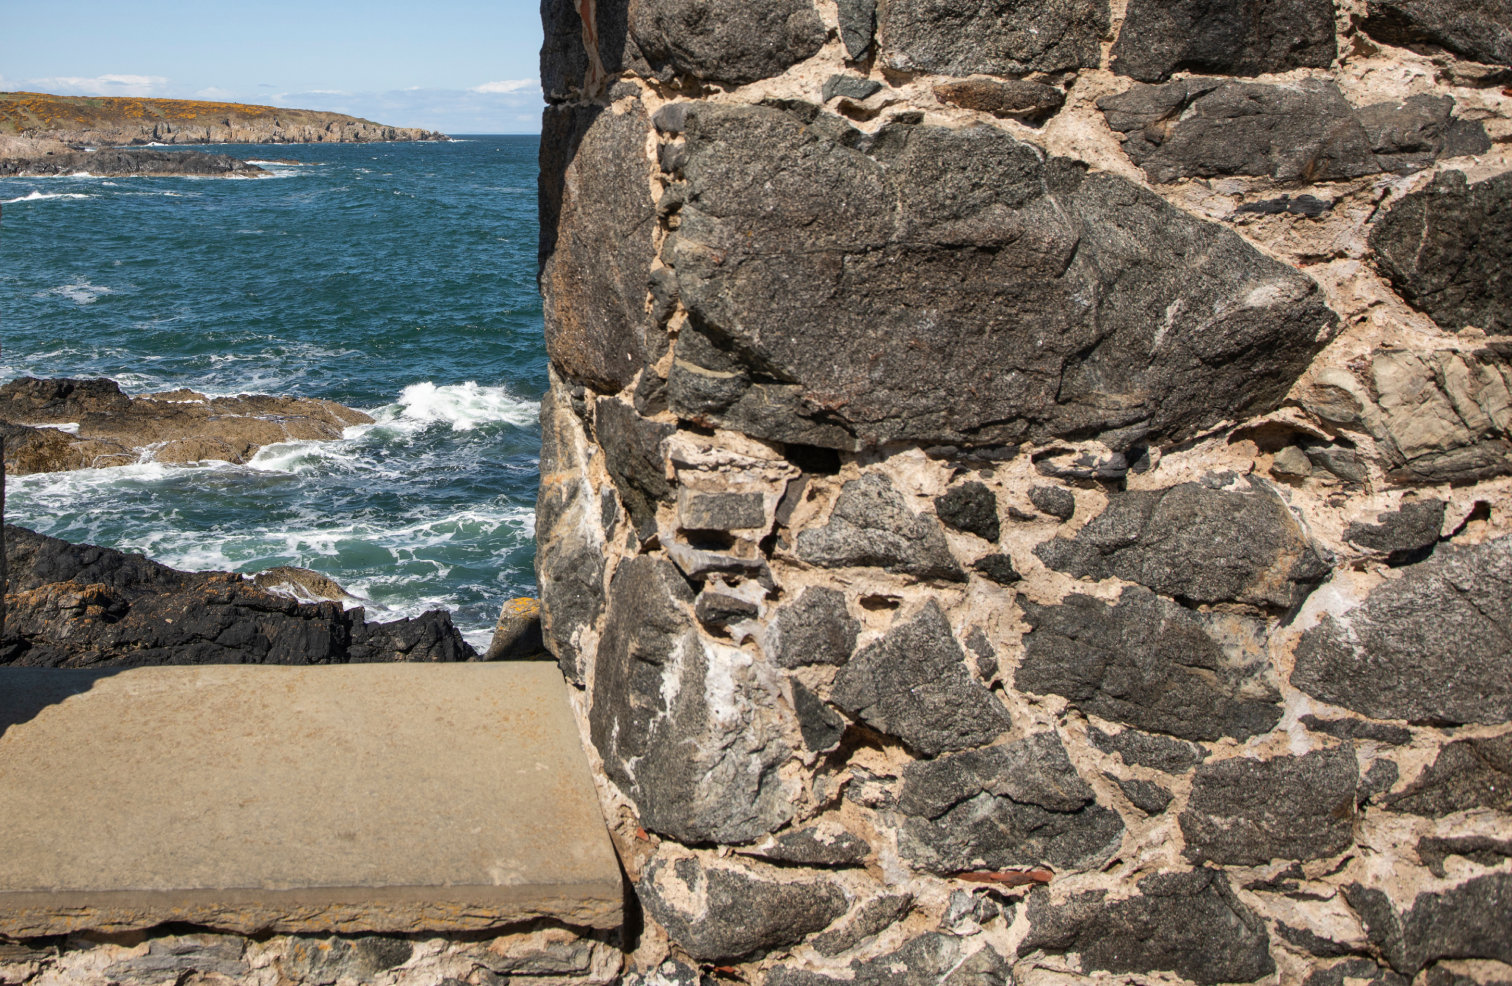 Close up view of the rocks forming a building and the ocean in the background.